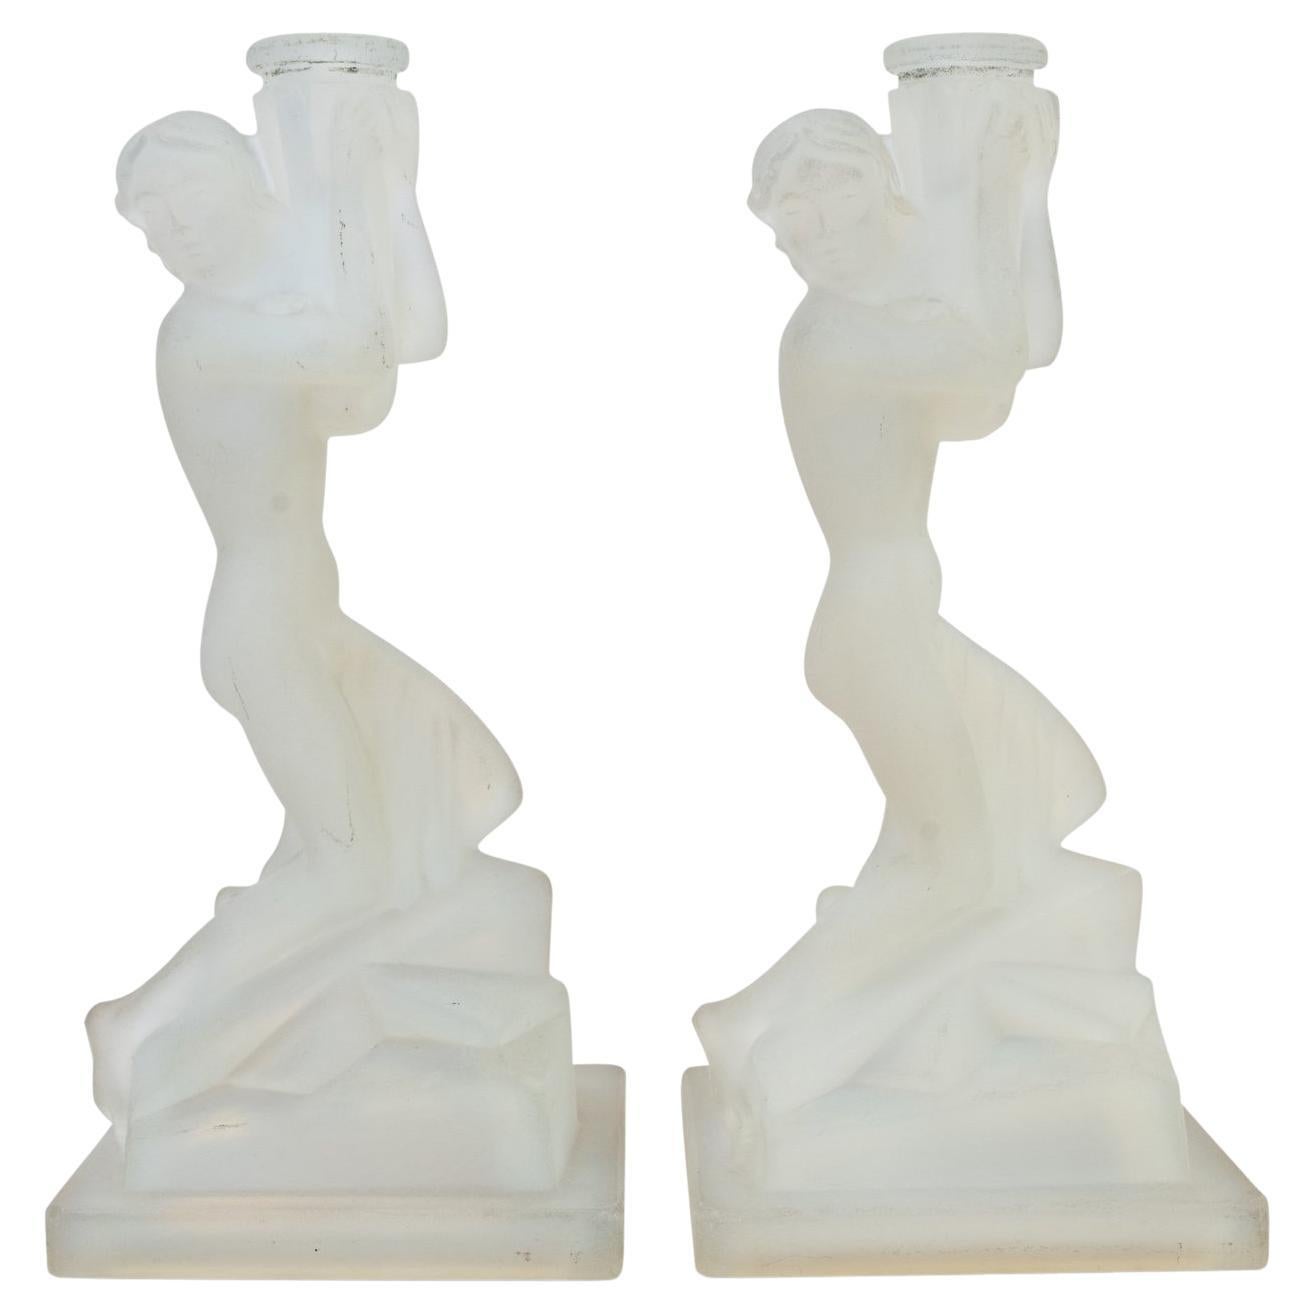 Pair of Lalique Style Art Deco Opalescent Glass Nude Female Candle Holders On A Square Plinth Base, Unsigned

Provenance : The Mavis and John Wareham Collection 